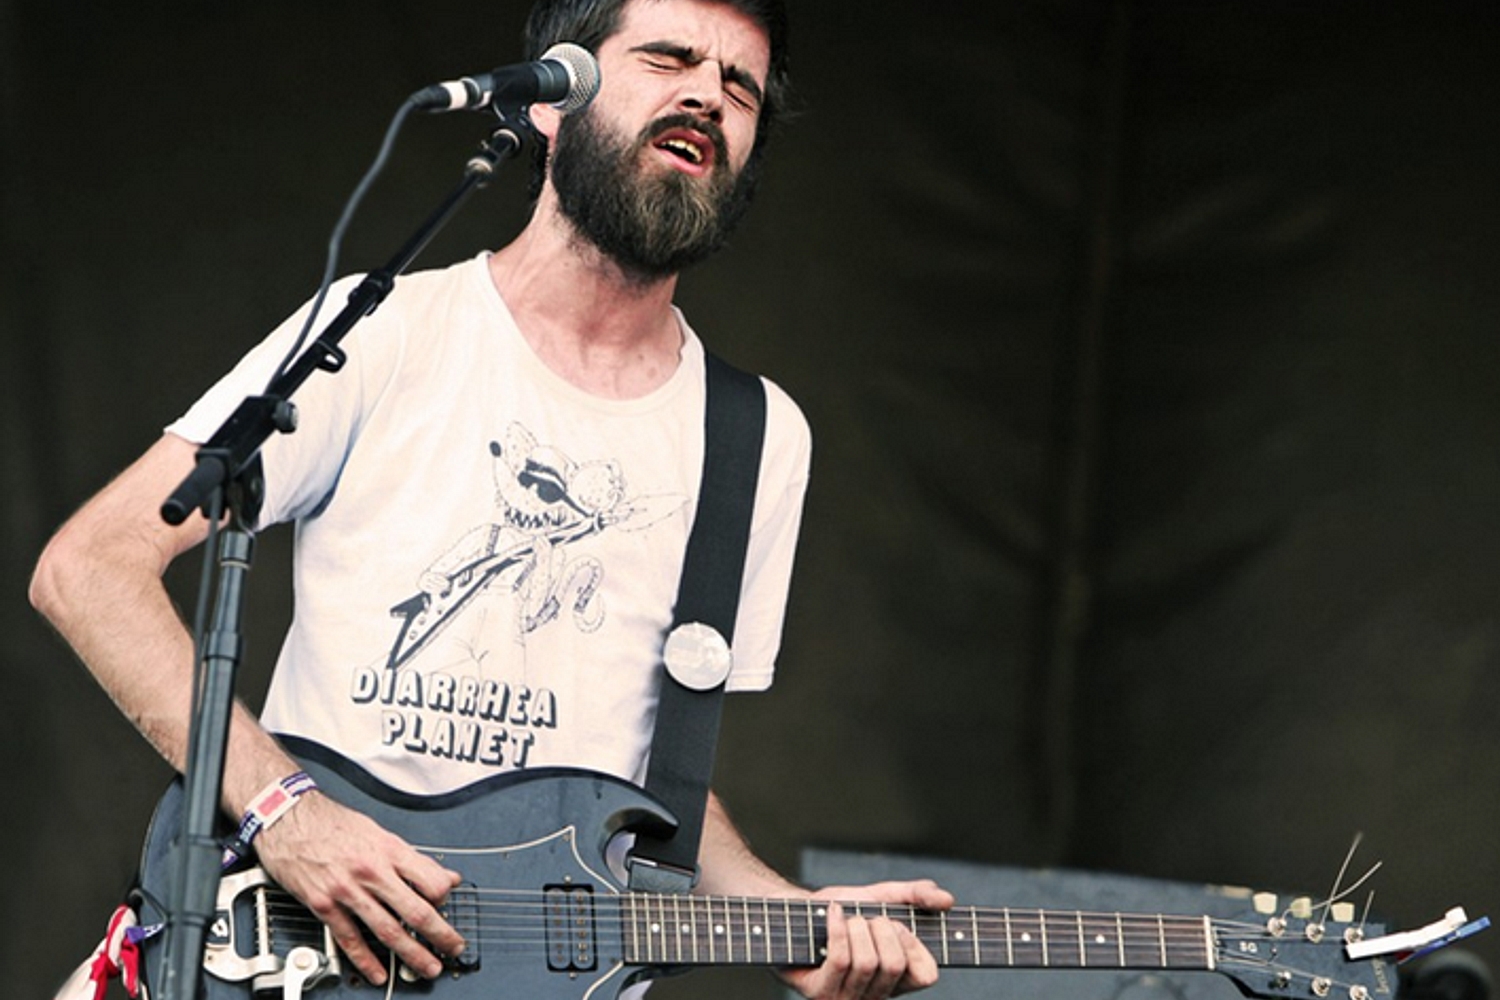 Titus Andronicus cover The Weeknd’s ‘The Hills’